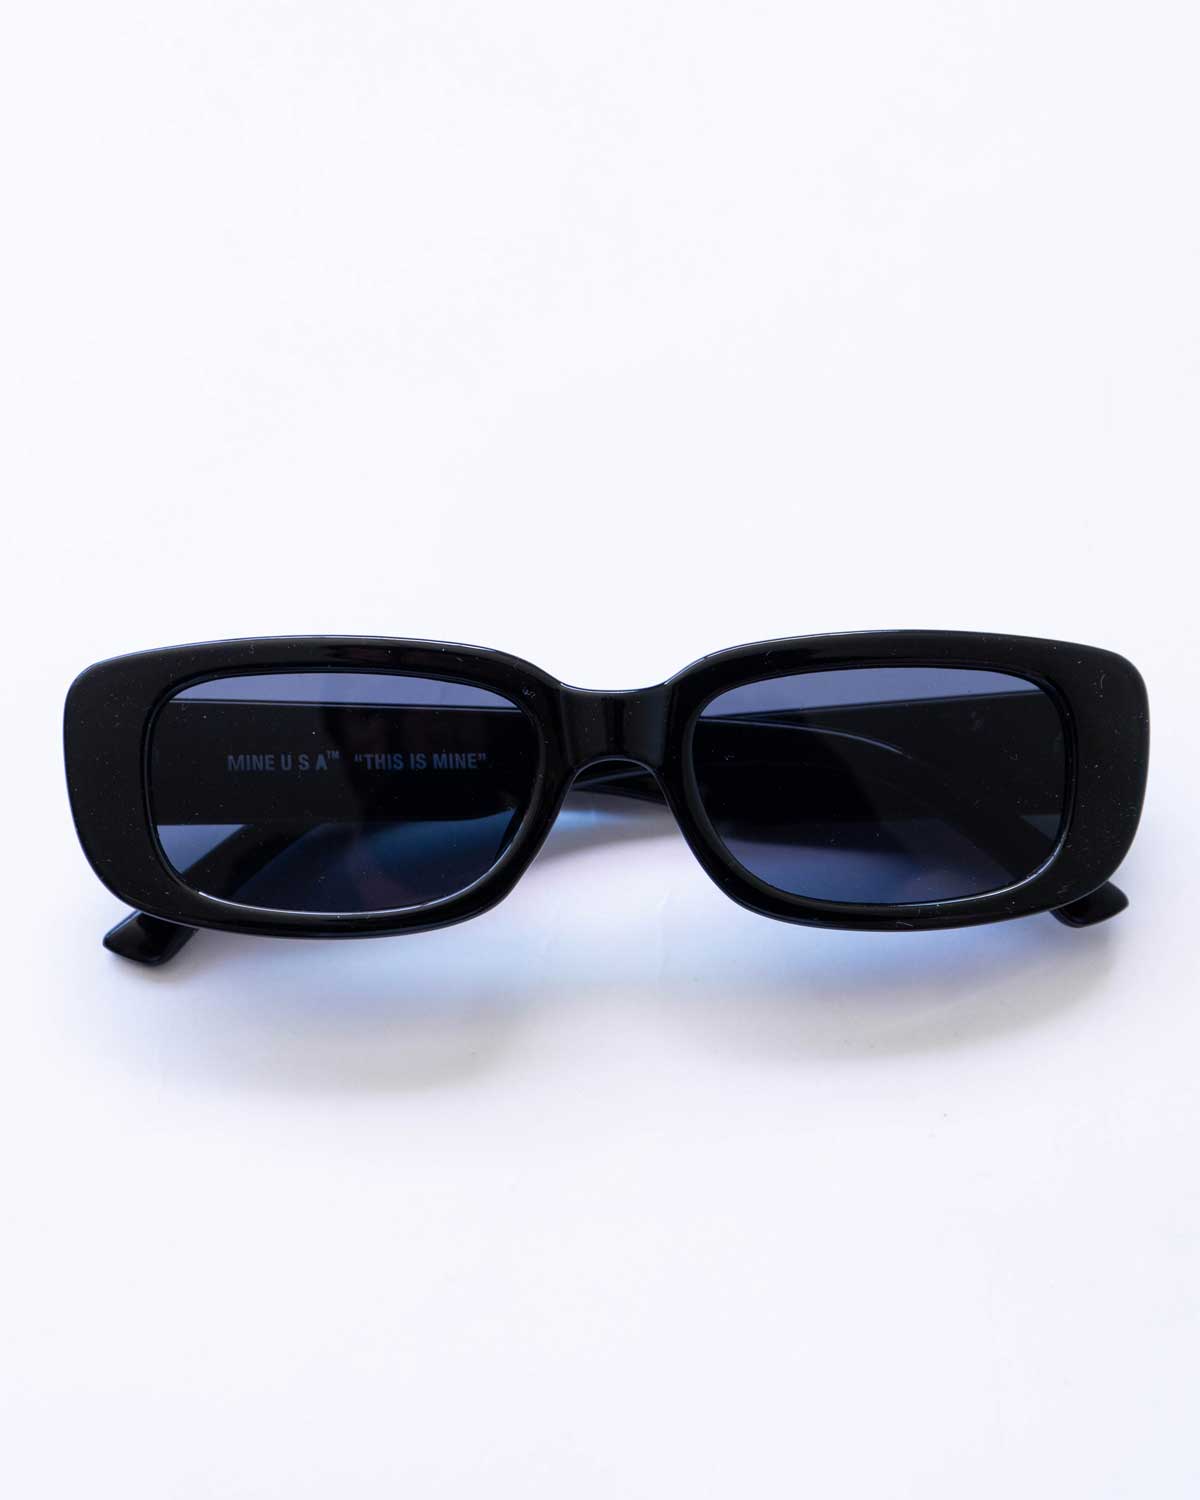 “MINE Glasses #02” with a case（BLACK）